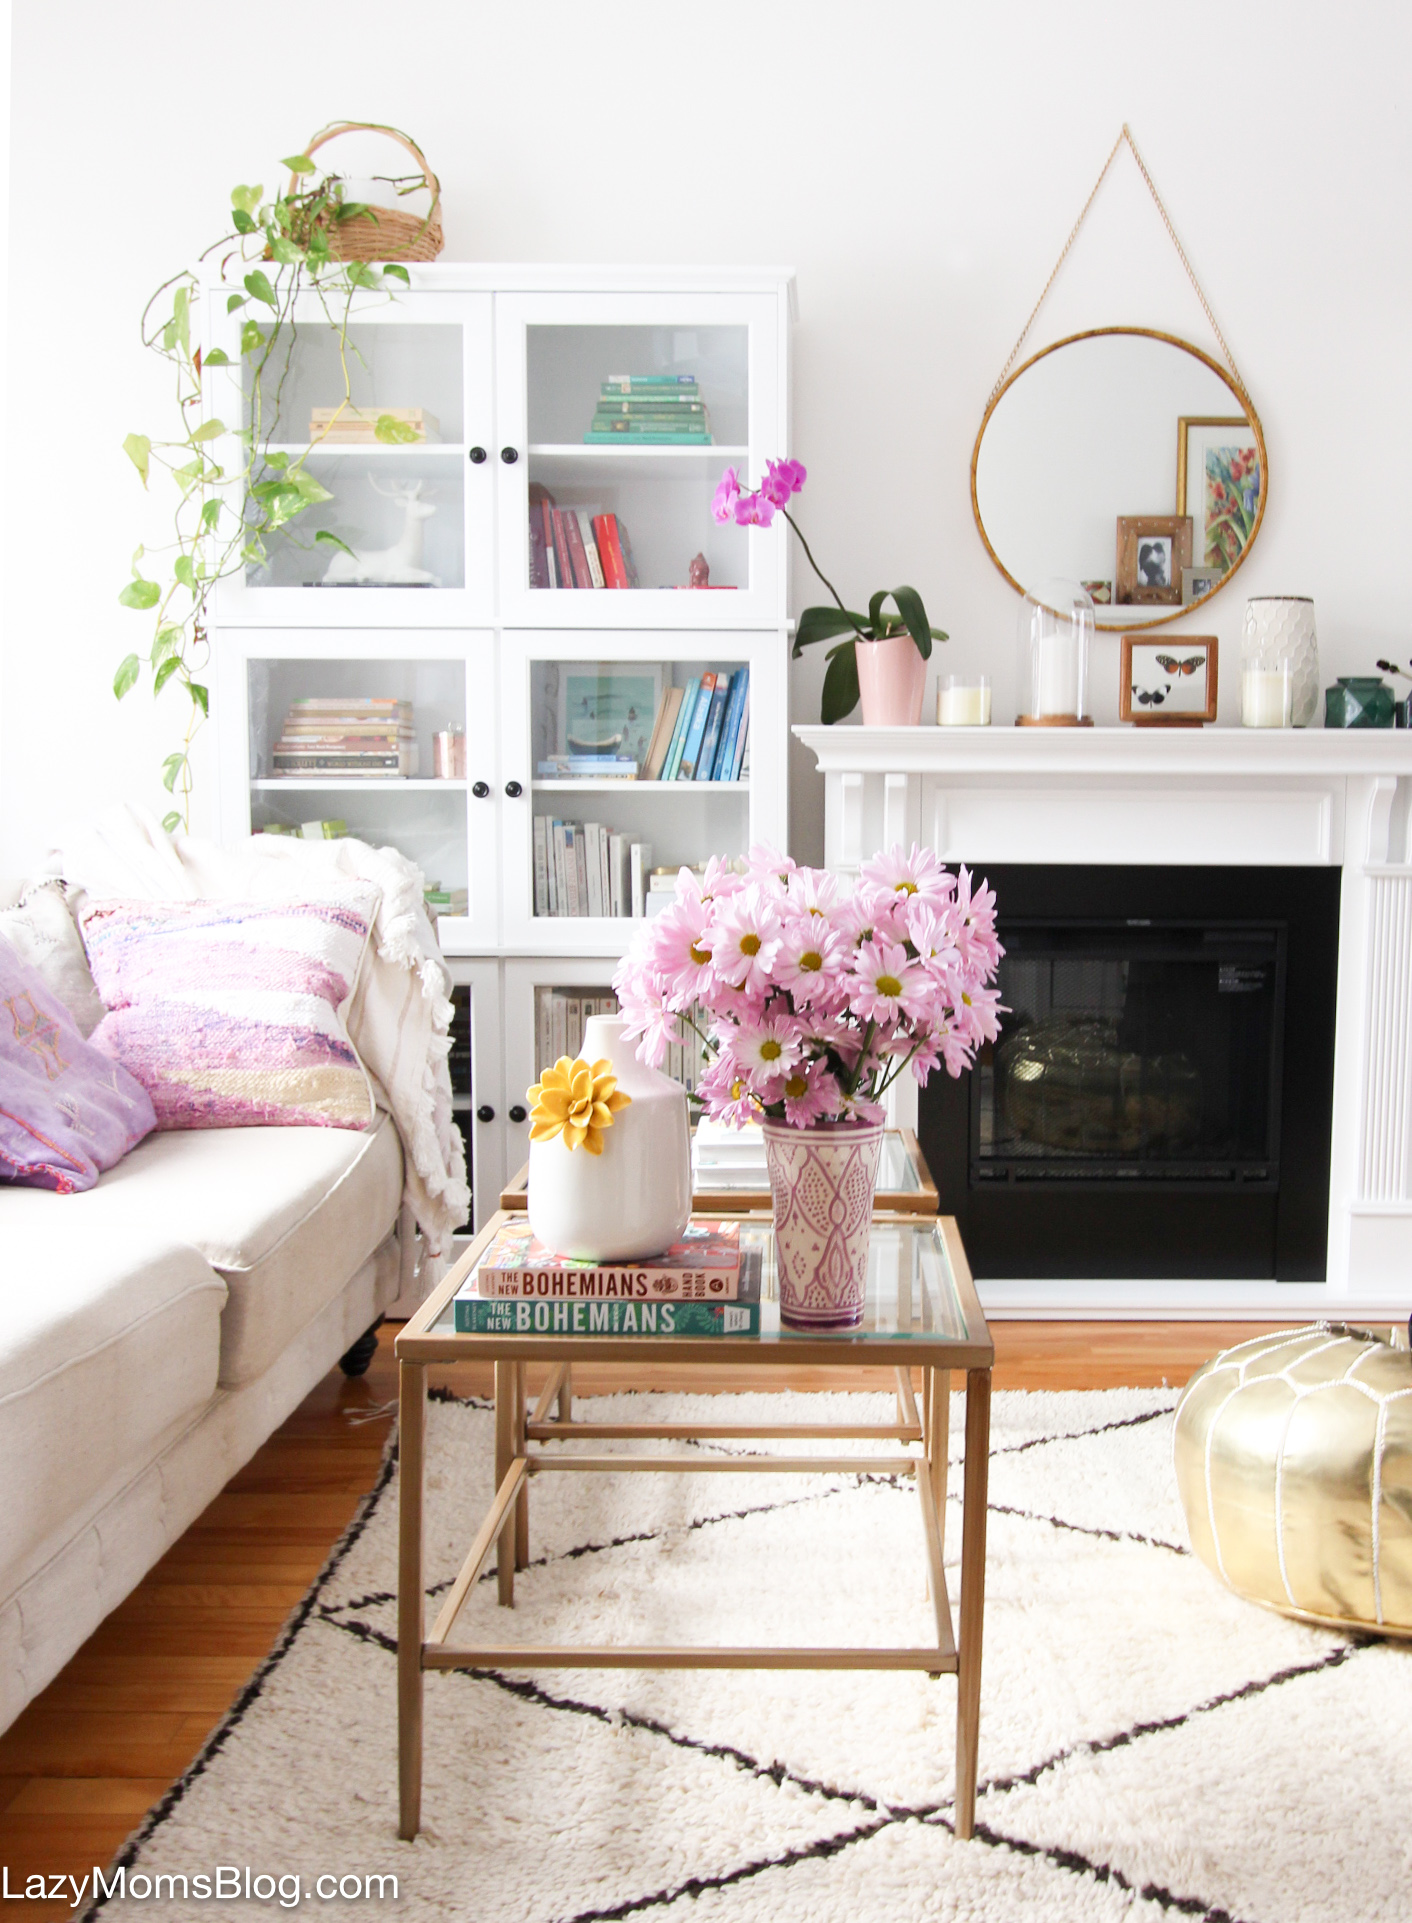 Creating a happy home: tips and tricks for overcoming a decorating rut